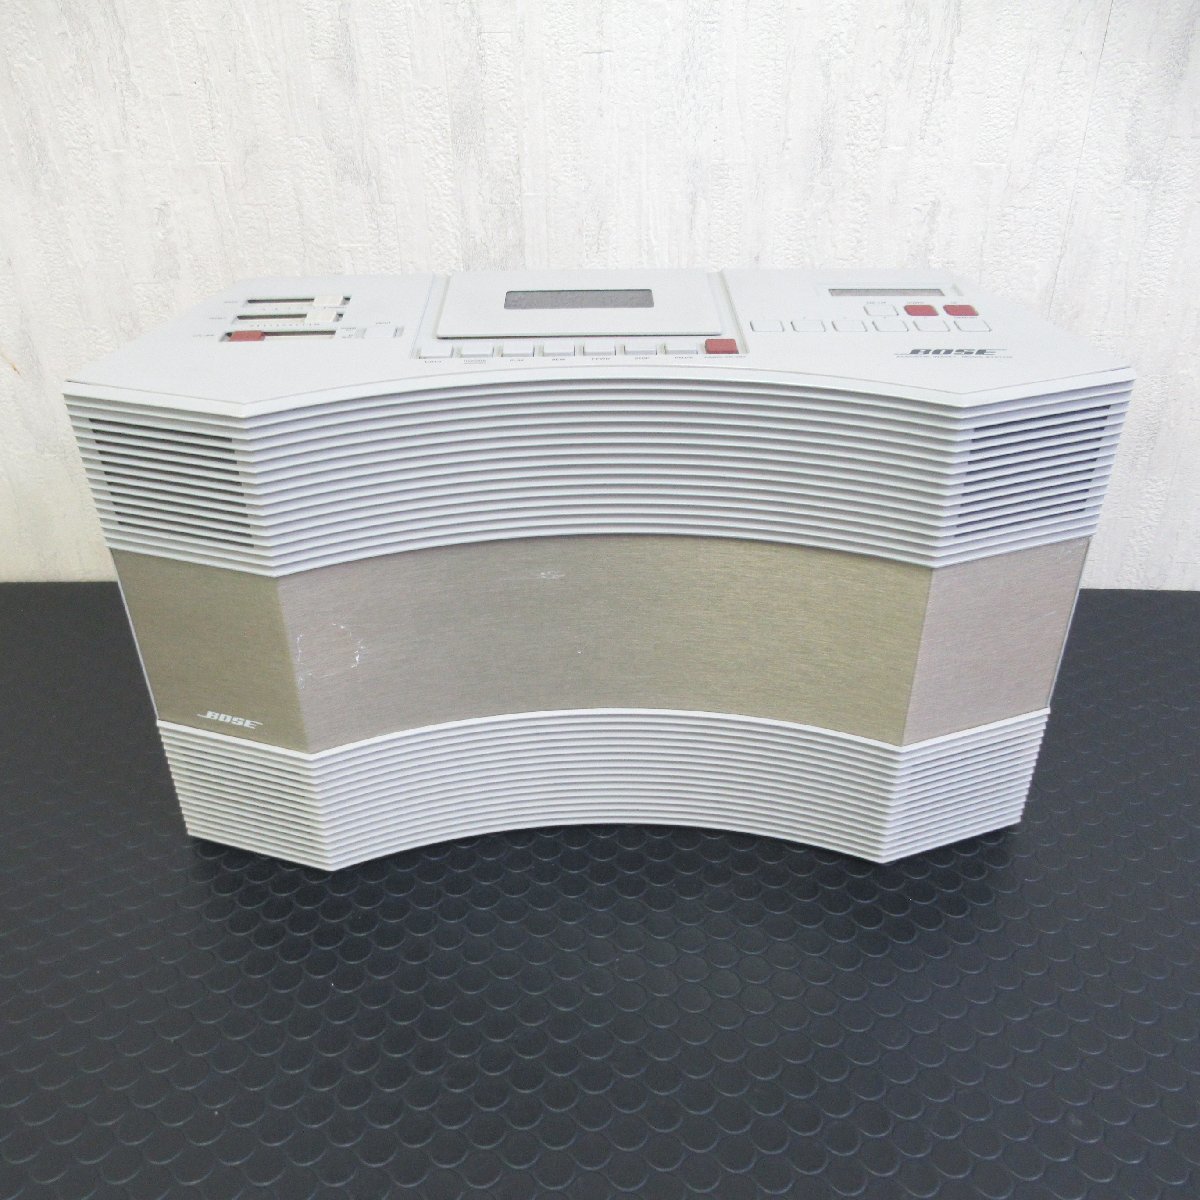 BOSE（ボーズ）Acoustic Wave stereo music system ラジカセ AW-1【 品